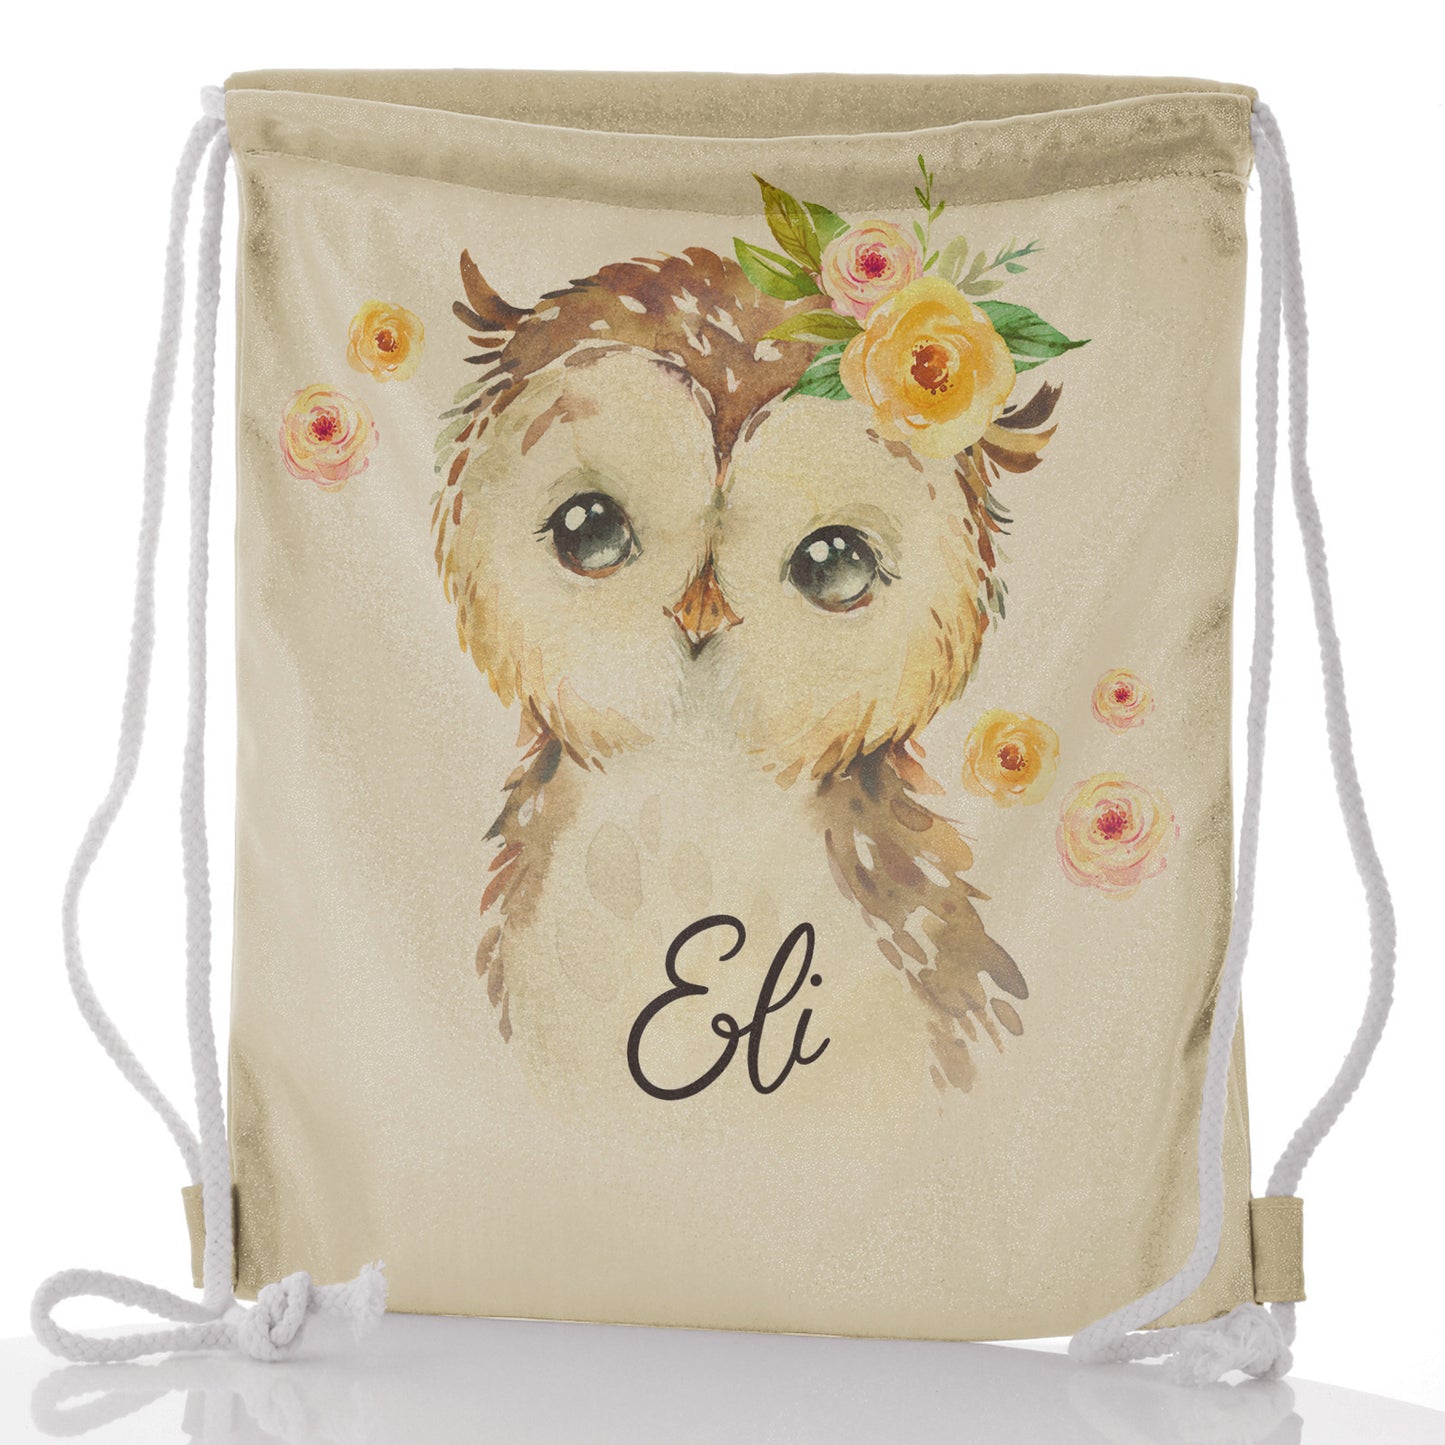 Personalised Glitter Drawstring Backpack with Brown Owl Yellow Flowers and Cute Text